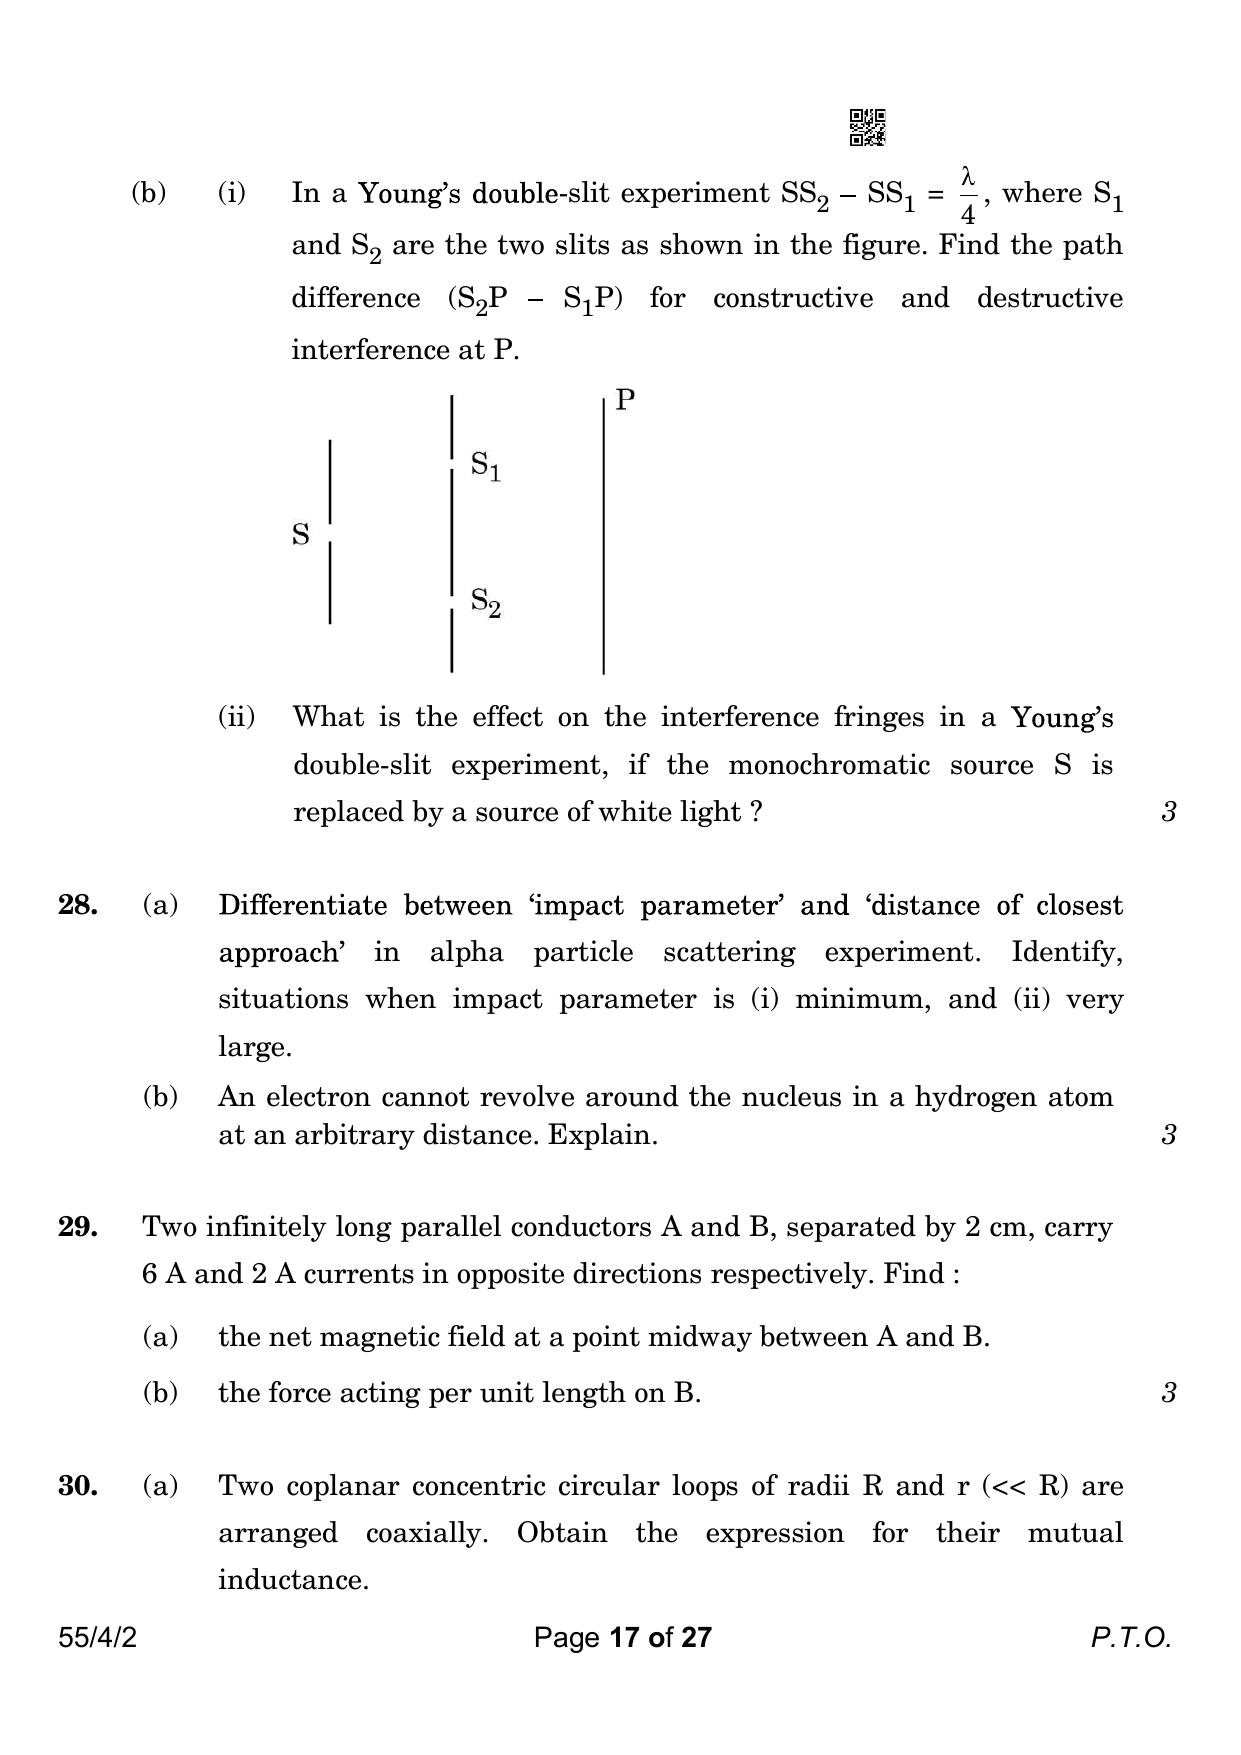 CBSE Class 12 55-4-2 Physics 2023 Question Paper - Page 17